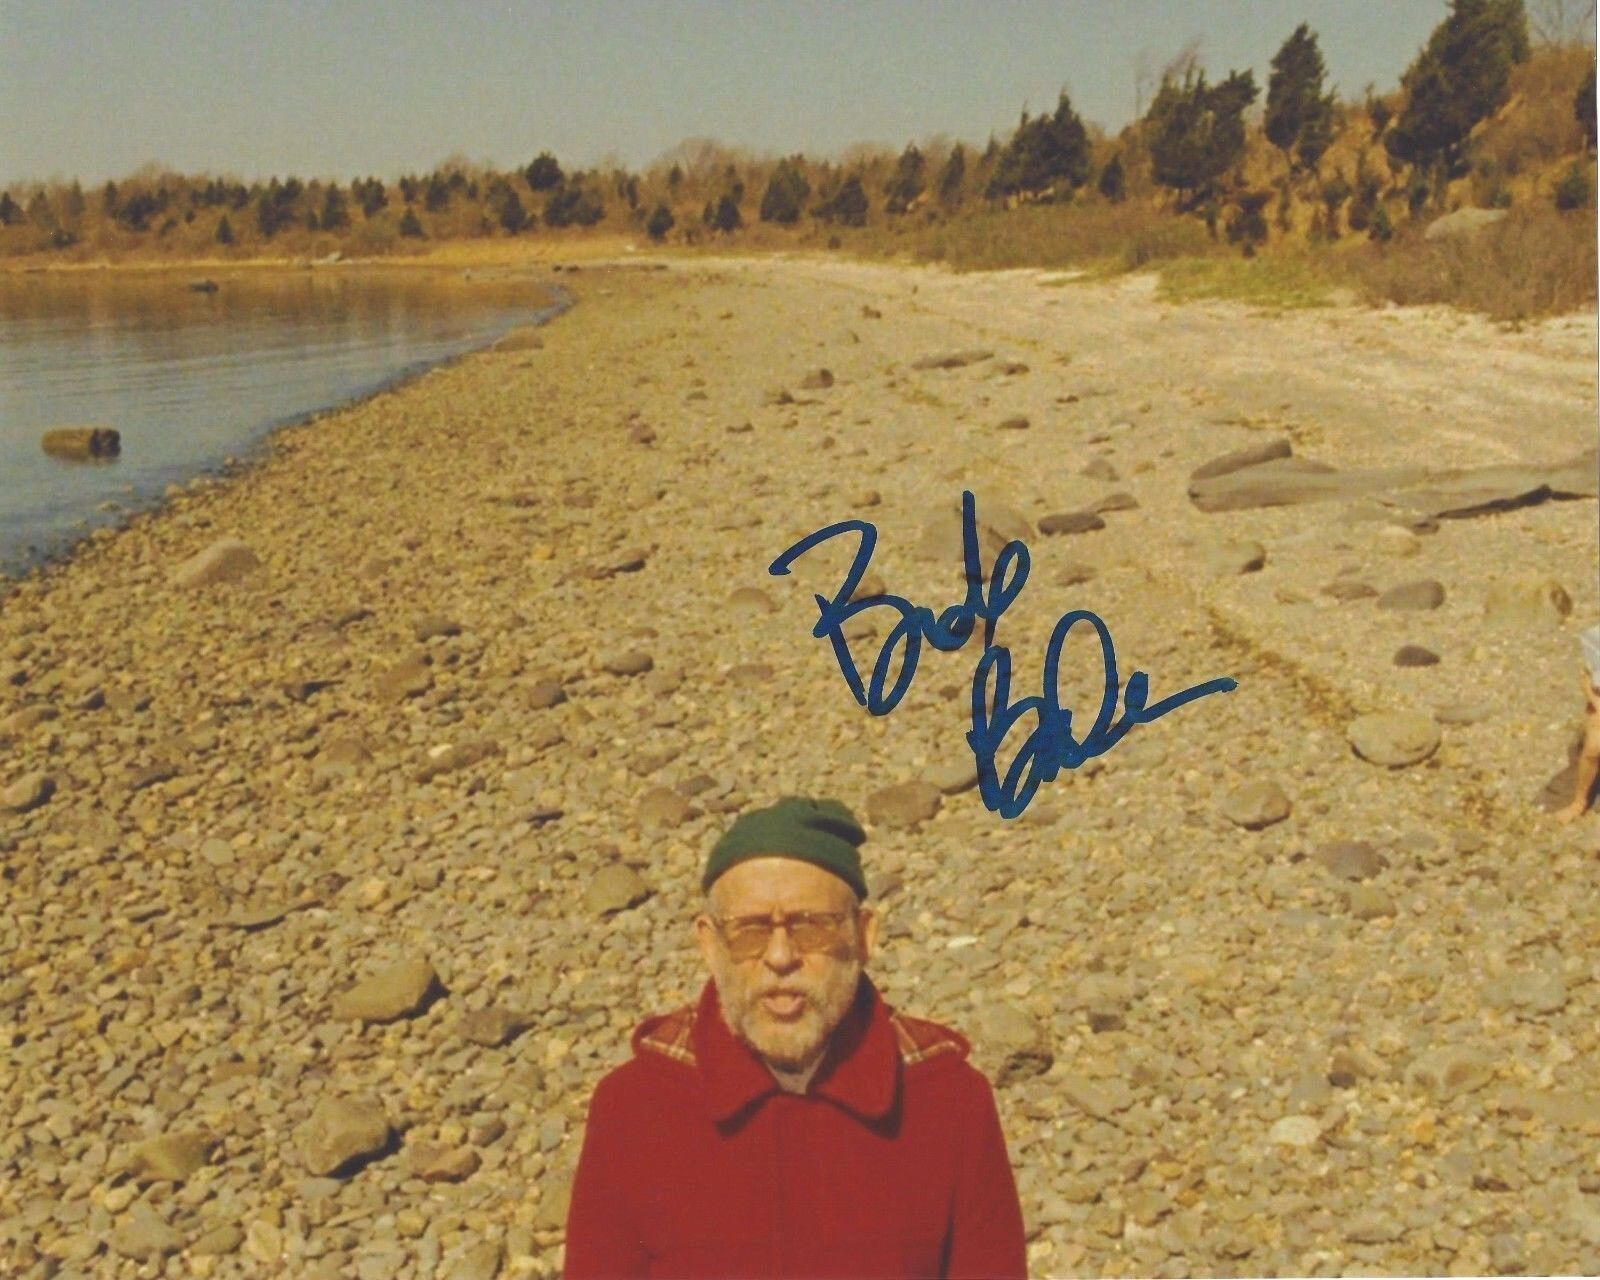 ACTOR BOB BALABAN SIGNED CLOSE ENCOUNTERS OF THE THIRD KIND 8X10 Photo Poster painting A W/COA